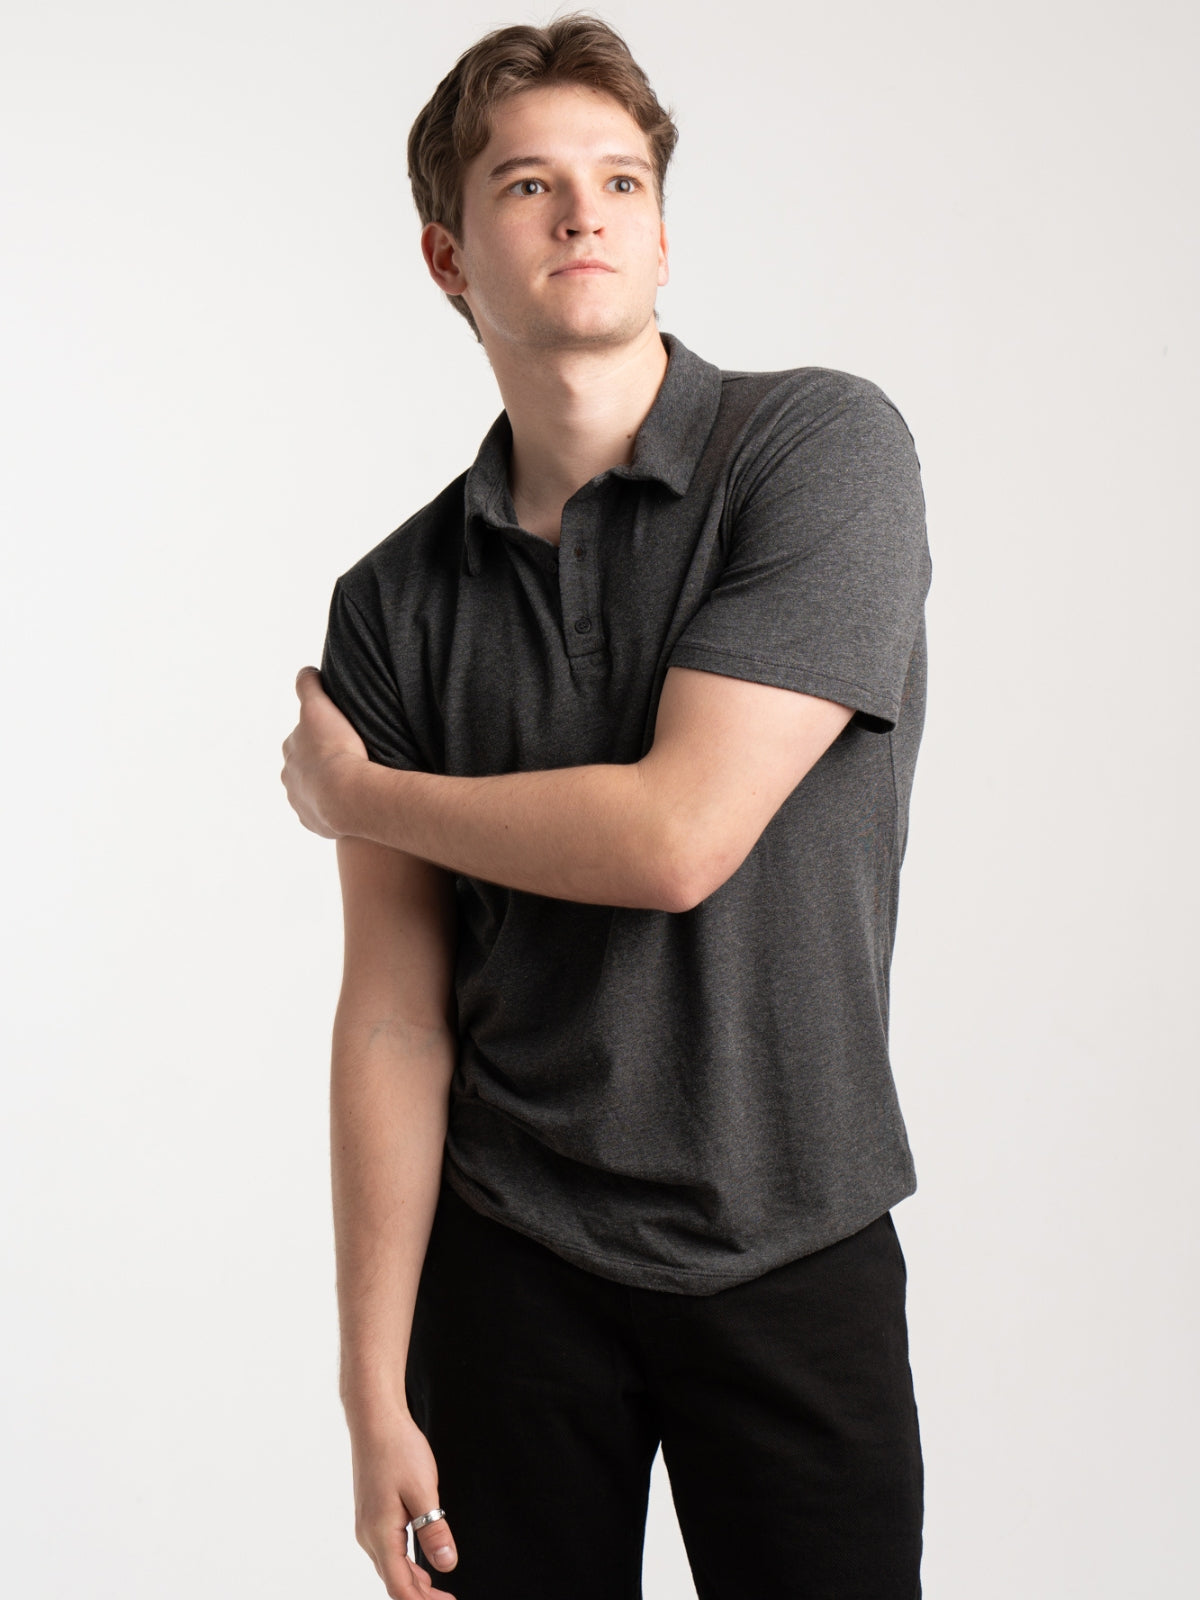 Two Blind Brothers - Mens Men's Short Sleeve Polo Charcoal